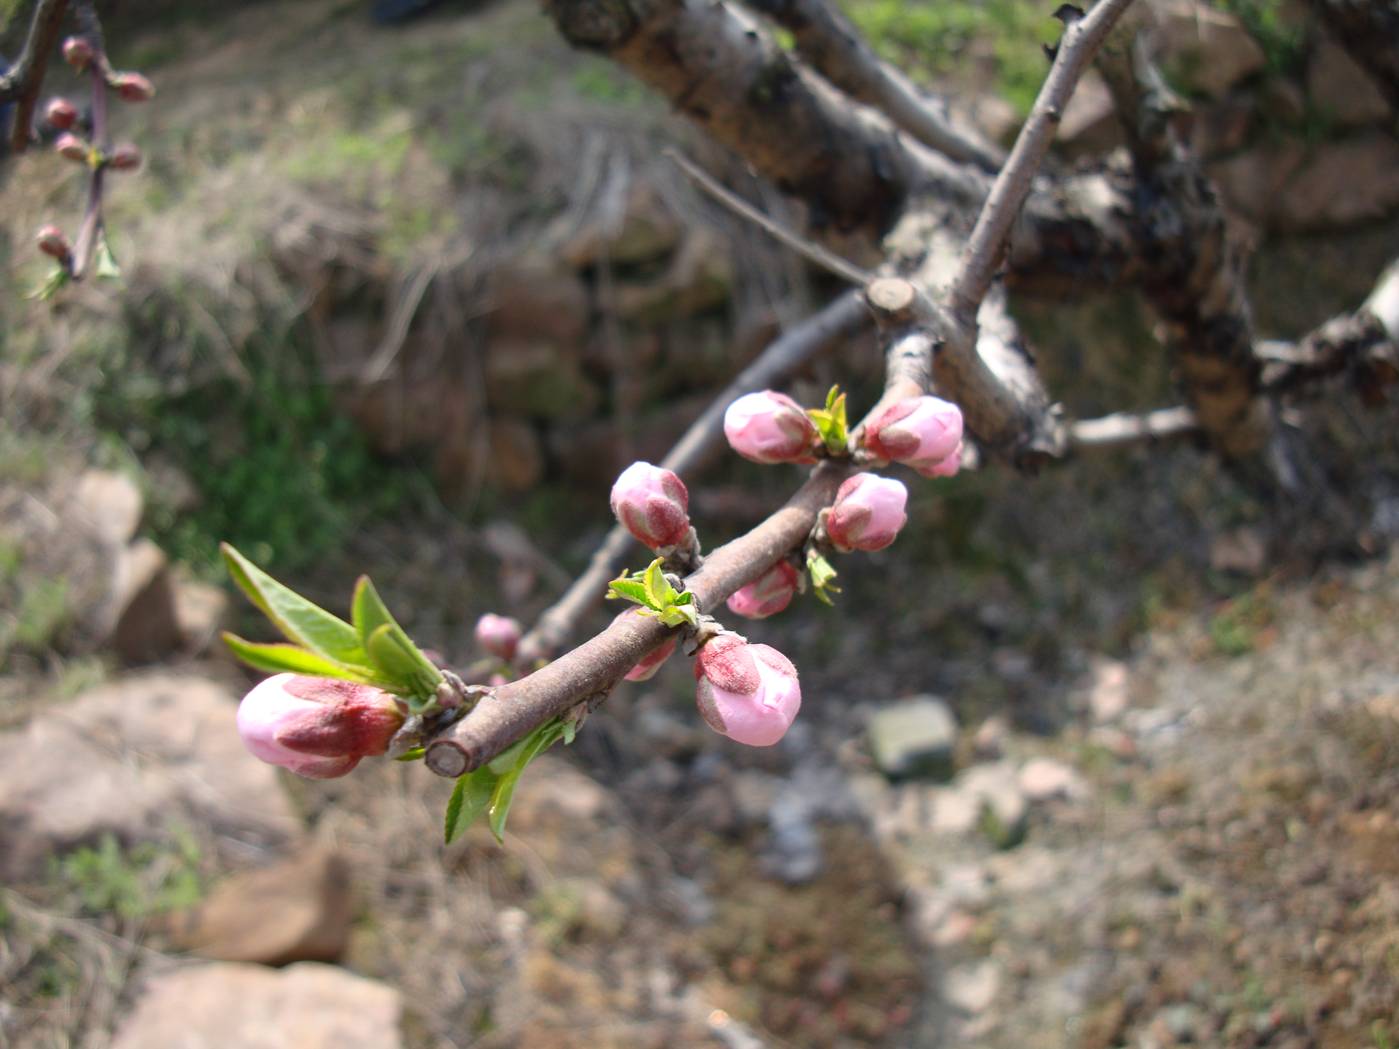 Picture:  Bursting peach blossoms, not yet out in all their glory.  Yang Shan, Wuxi, China